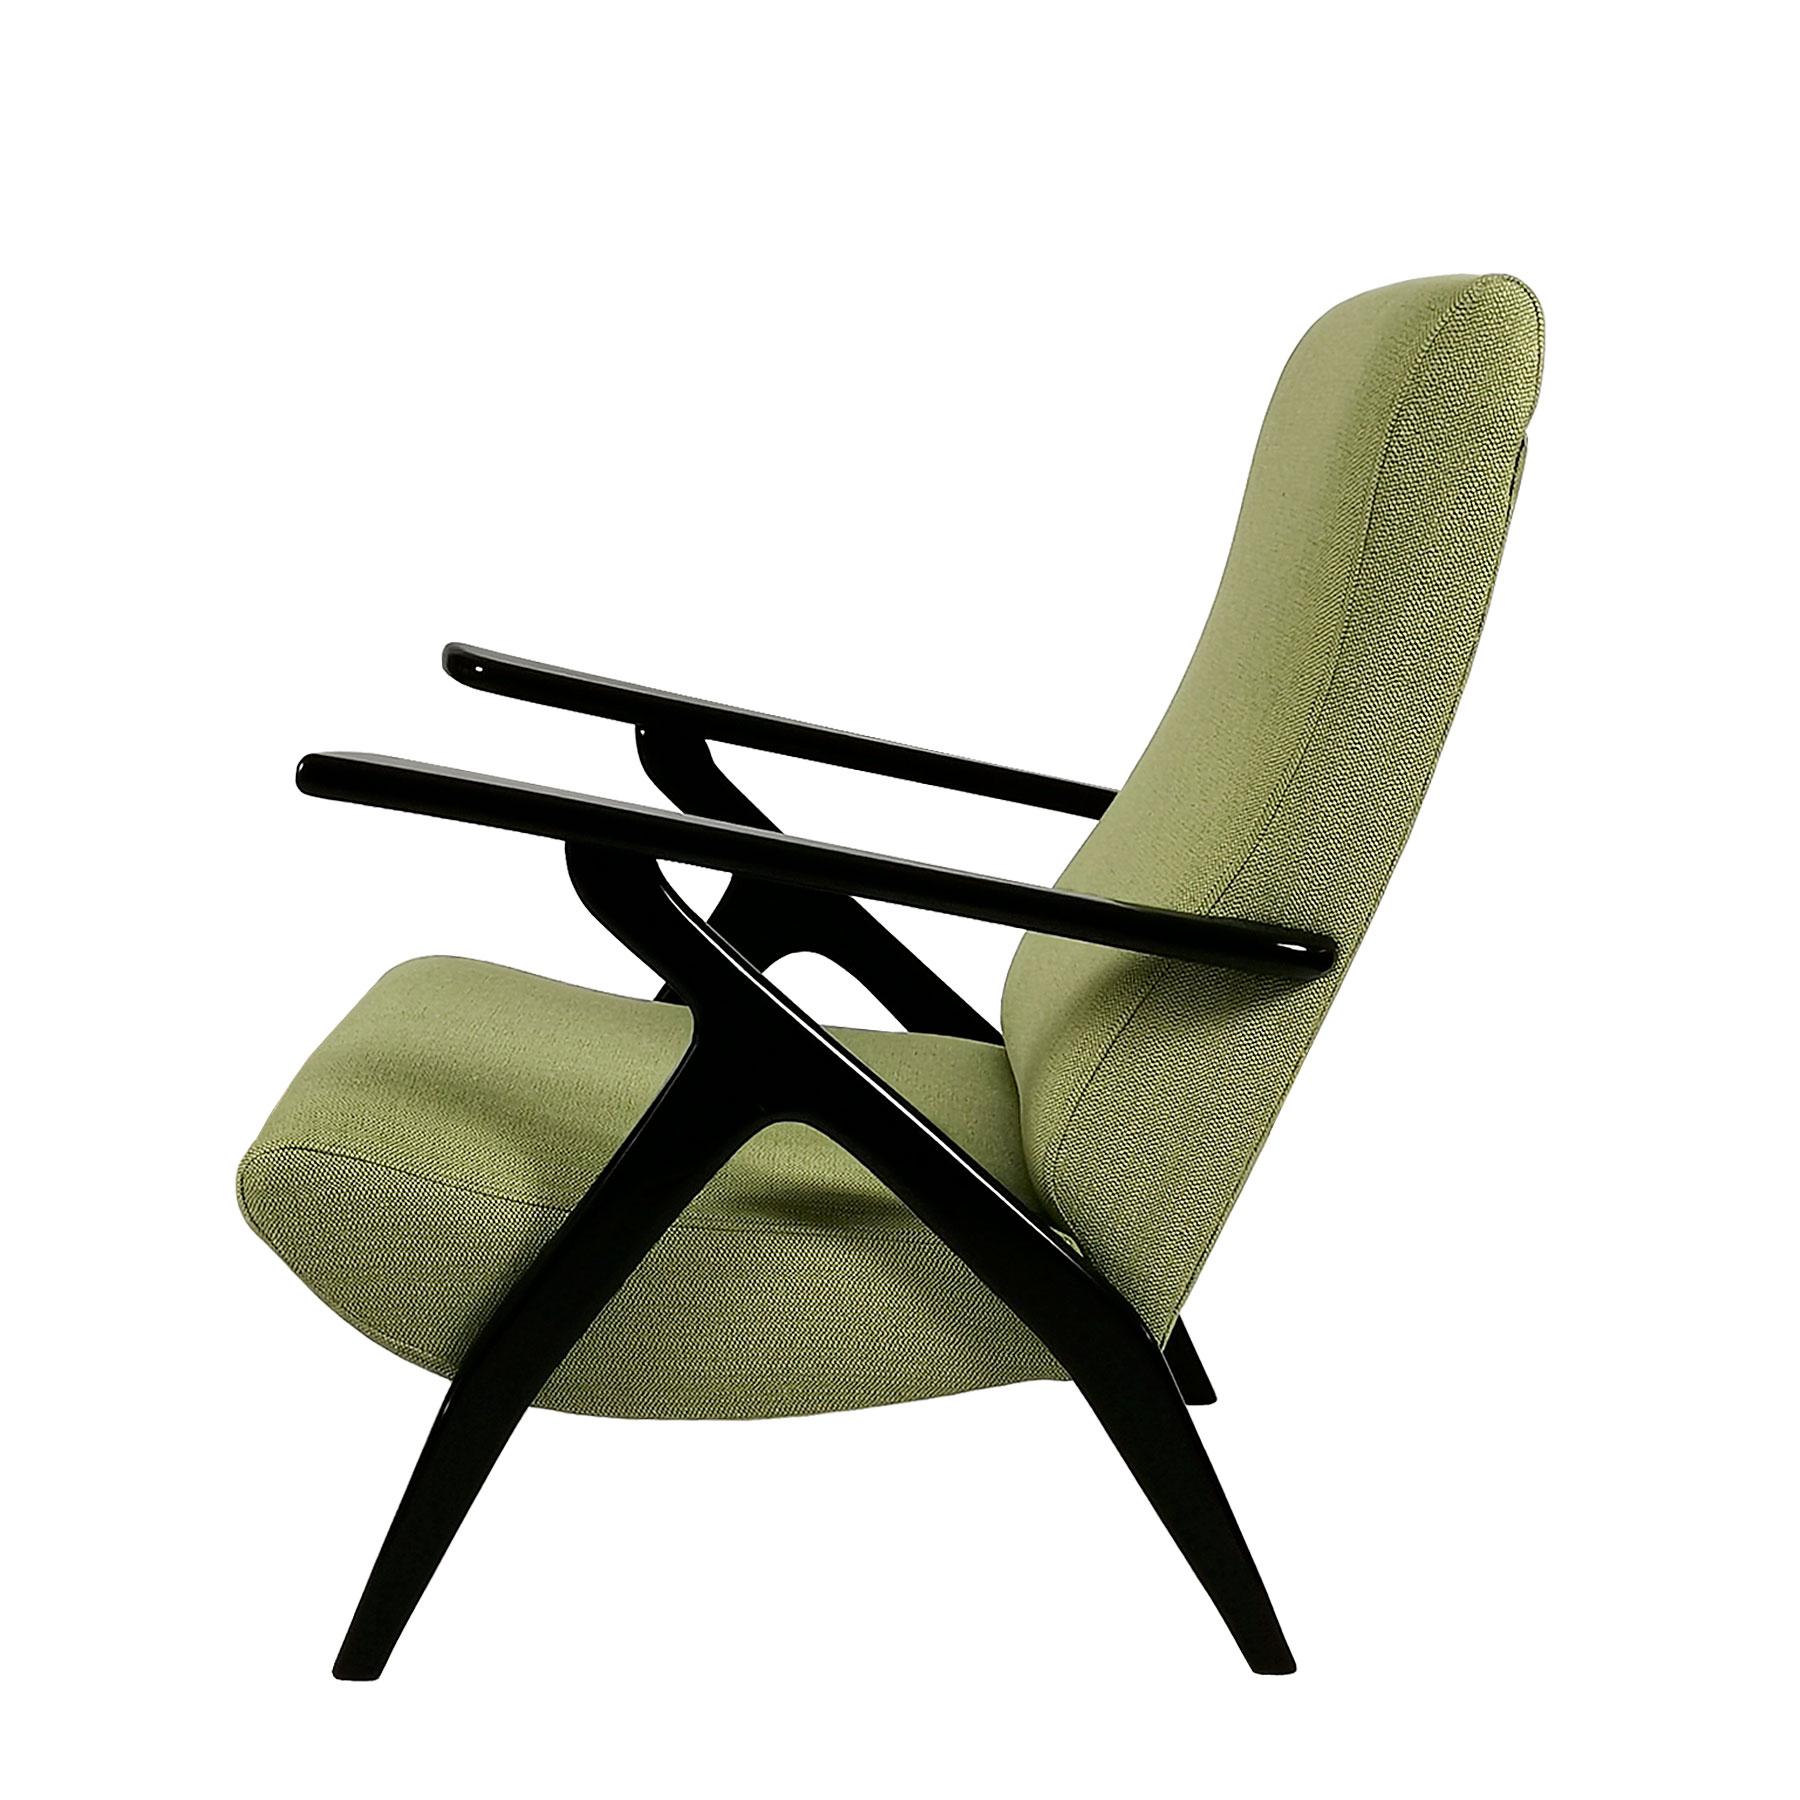 Stained Pair of Mid-Century Modern Armchairs, Beech Wood and Green Flecked Fabric- Italy For Sale